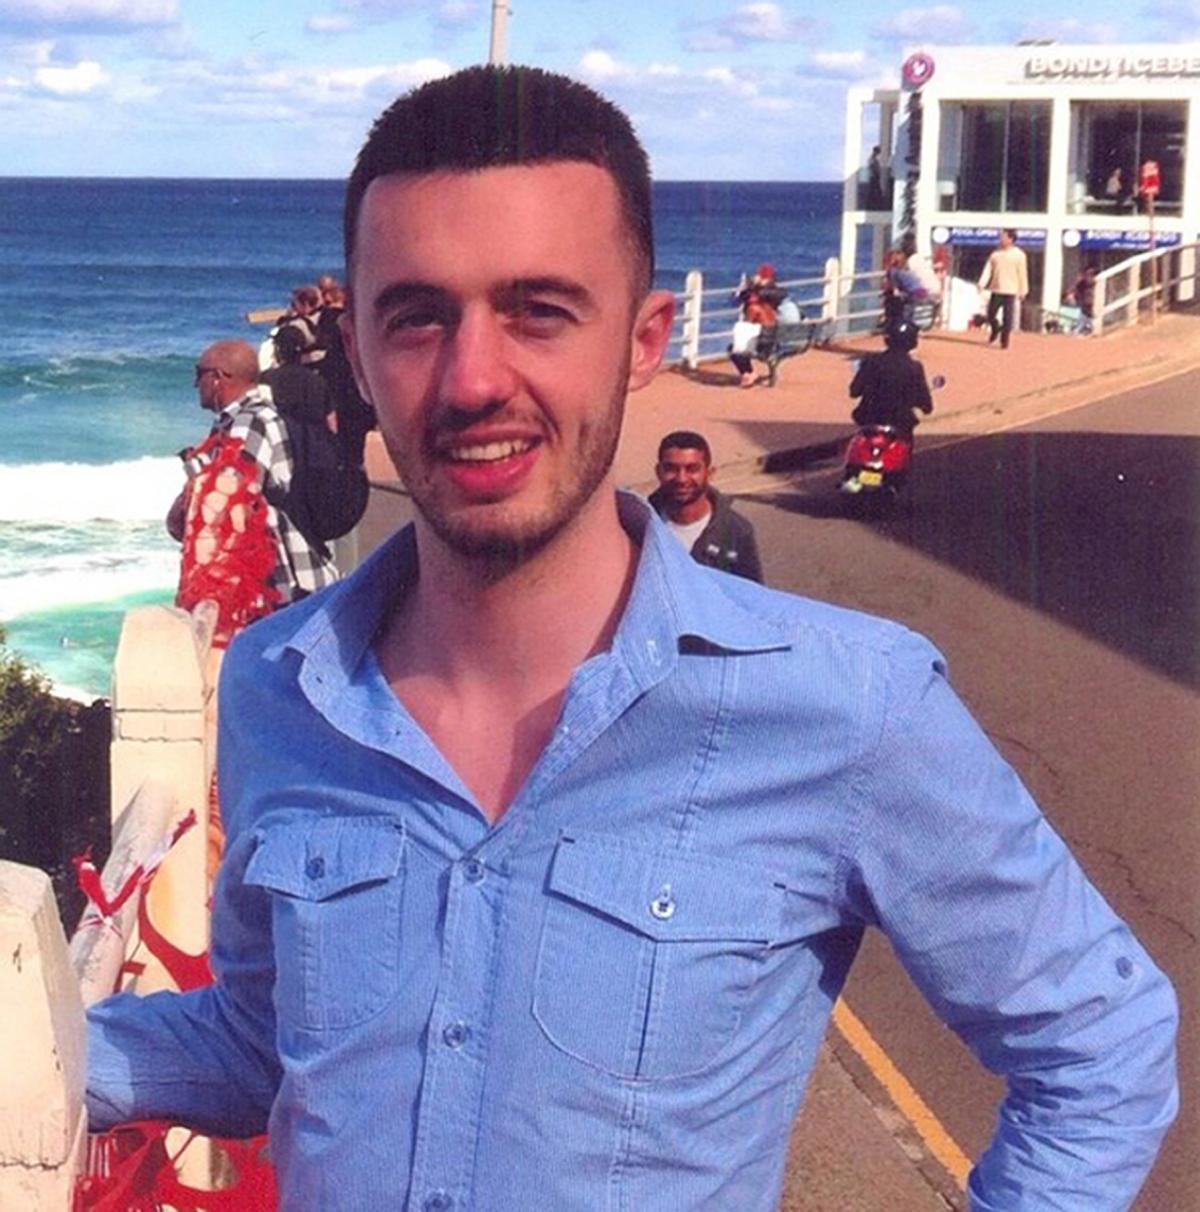 Craig Mallon who was killed in Spain. His father Ian is still looking for answers